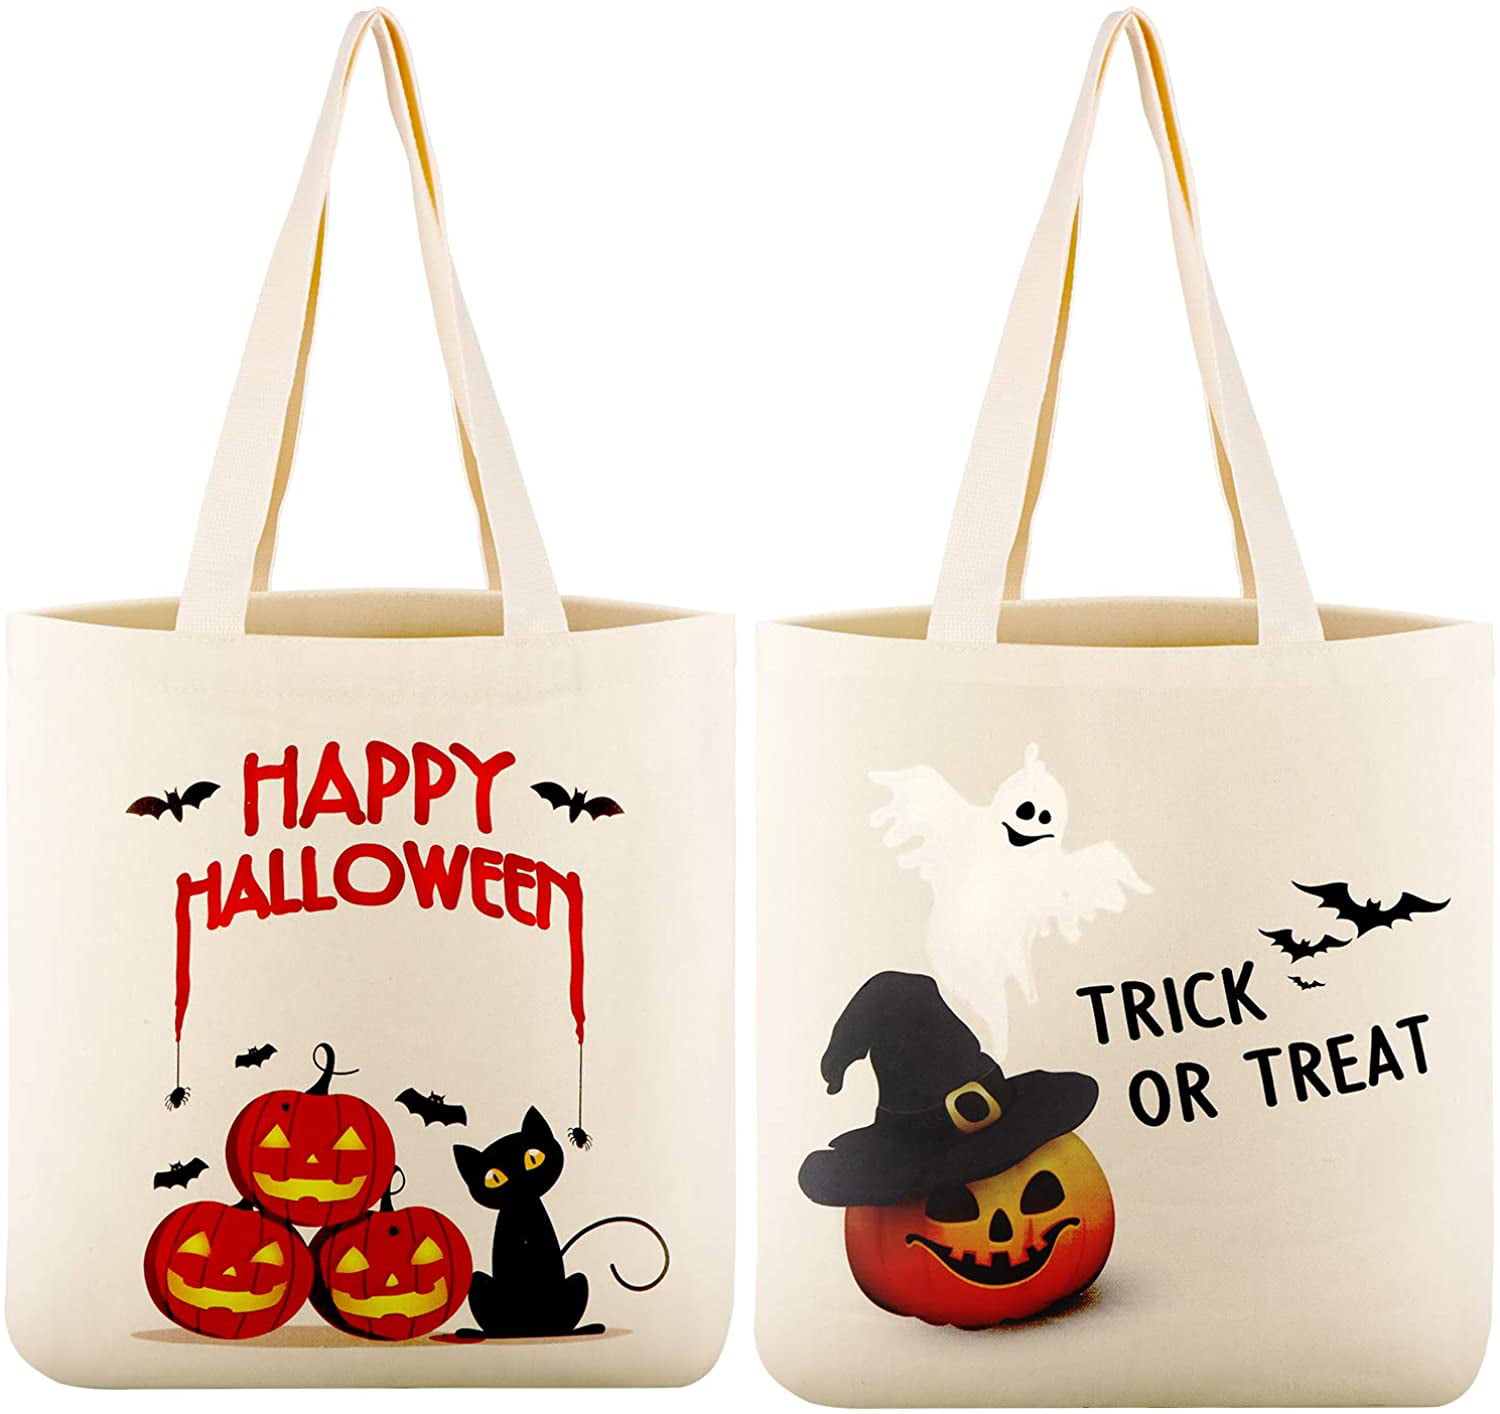 2 Pieces Halloween Tote Bag Reusable Canvas Bag Grocery Shopping Bag Trick or Treat Pumpkin Candy Bag for Halloween Party or Daily Supplies 